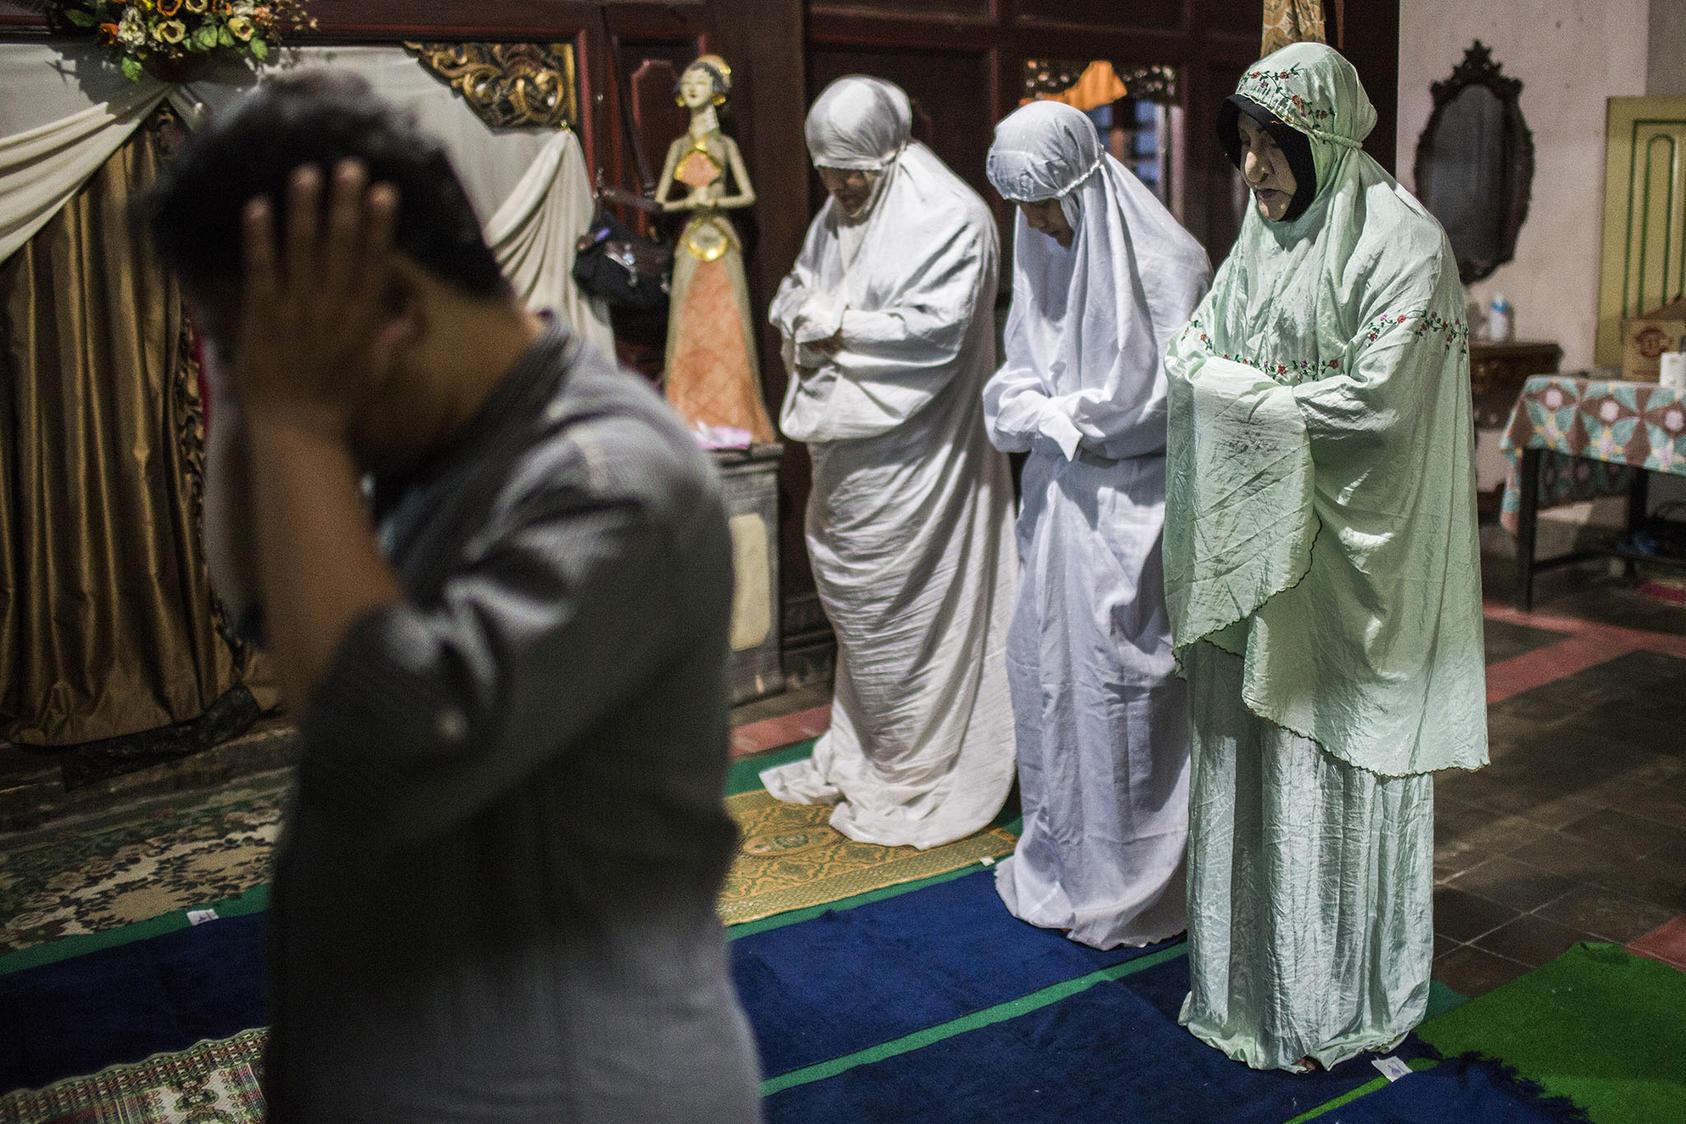 Members of Al Fatah Pesantren, possibly the only Muslim academy or madrasa for transgender people in the world, according to its leader, praying in Yogyakarta, Indonesia. December 6, 2015. (Kemal Jufri/The New York Times)